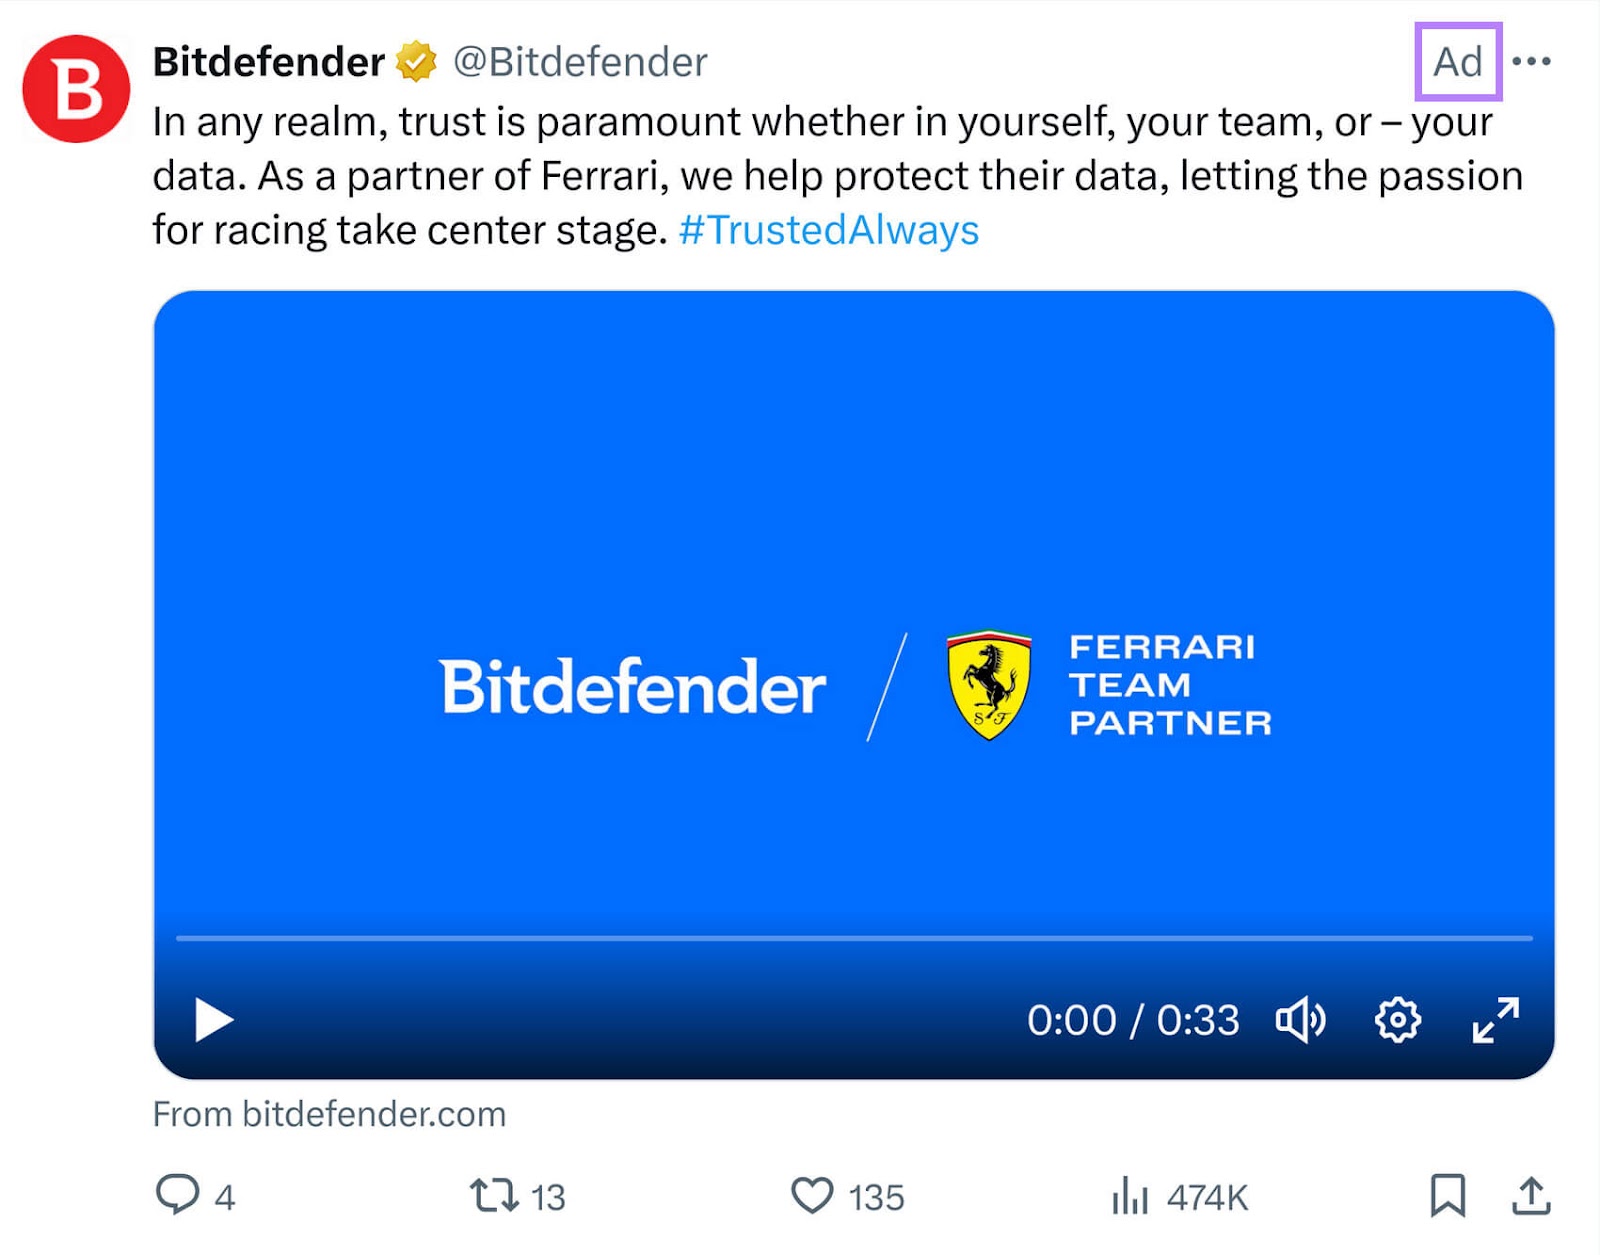 A promoted tweet from cybersecurity company Bitdefender